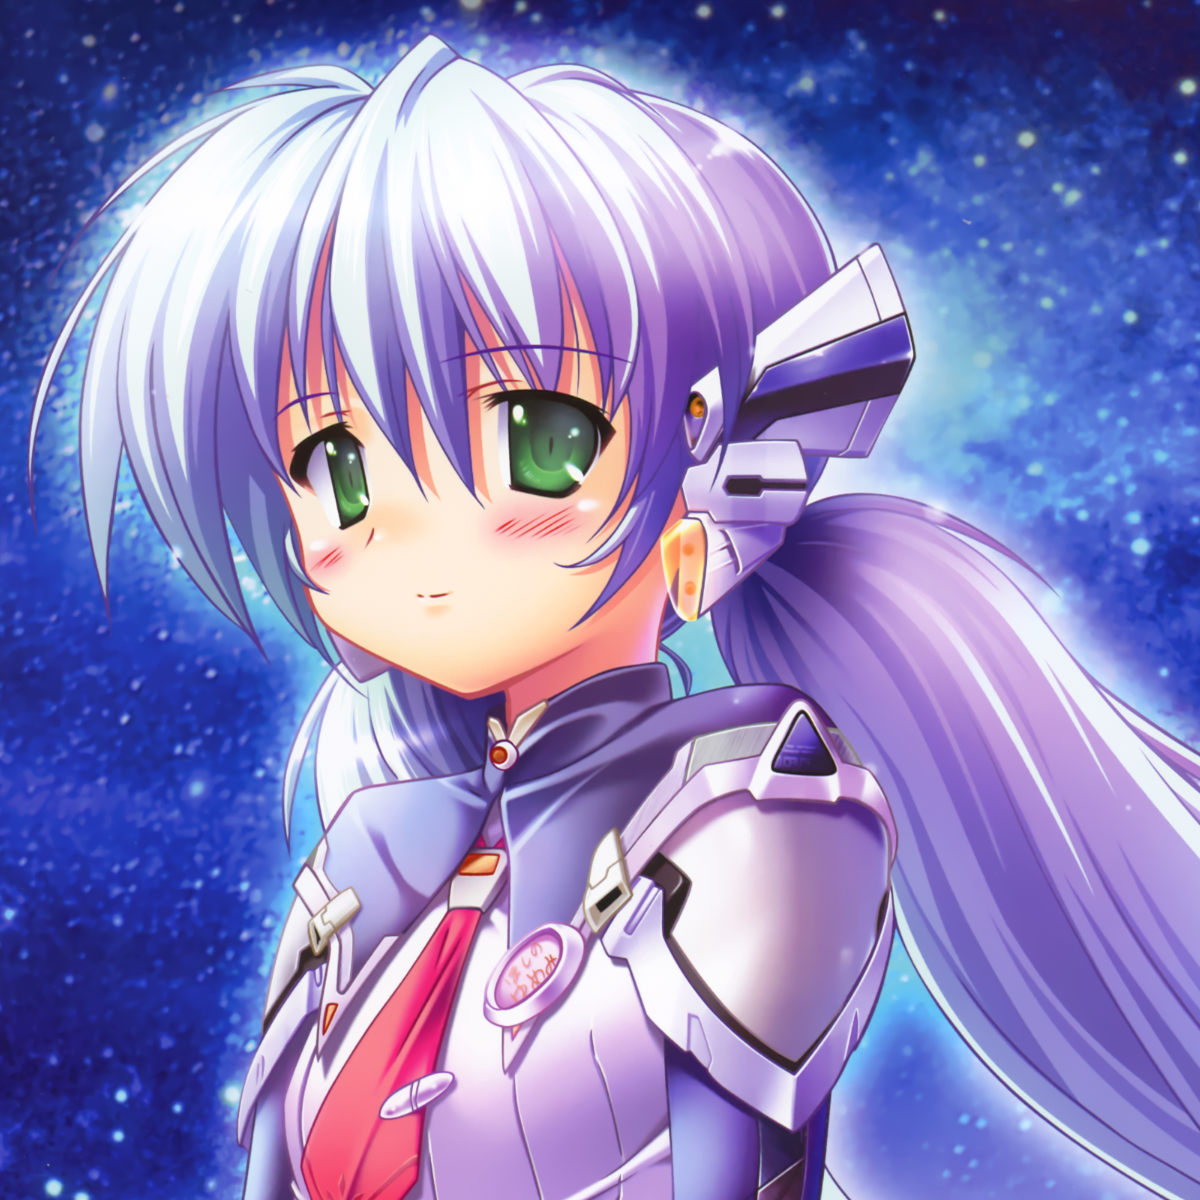 Planetarian: The Reverie of a Little Planet Pfp